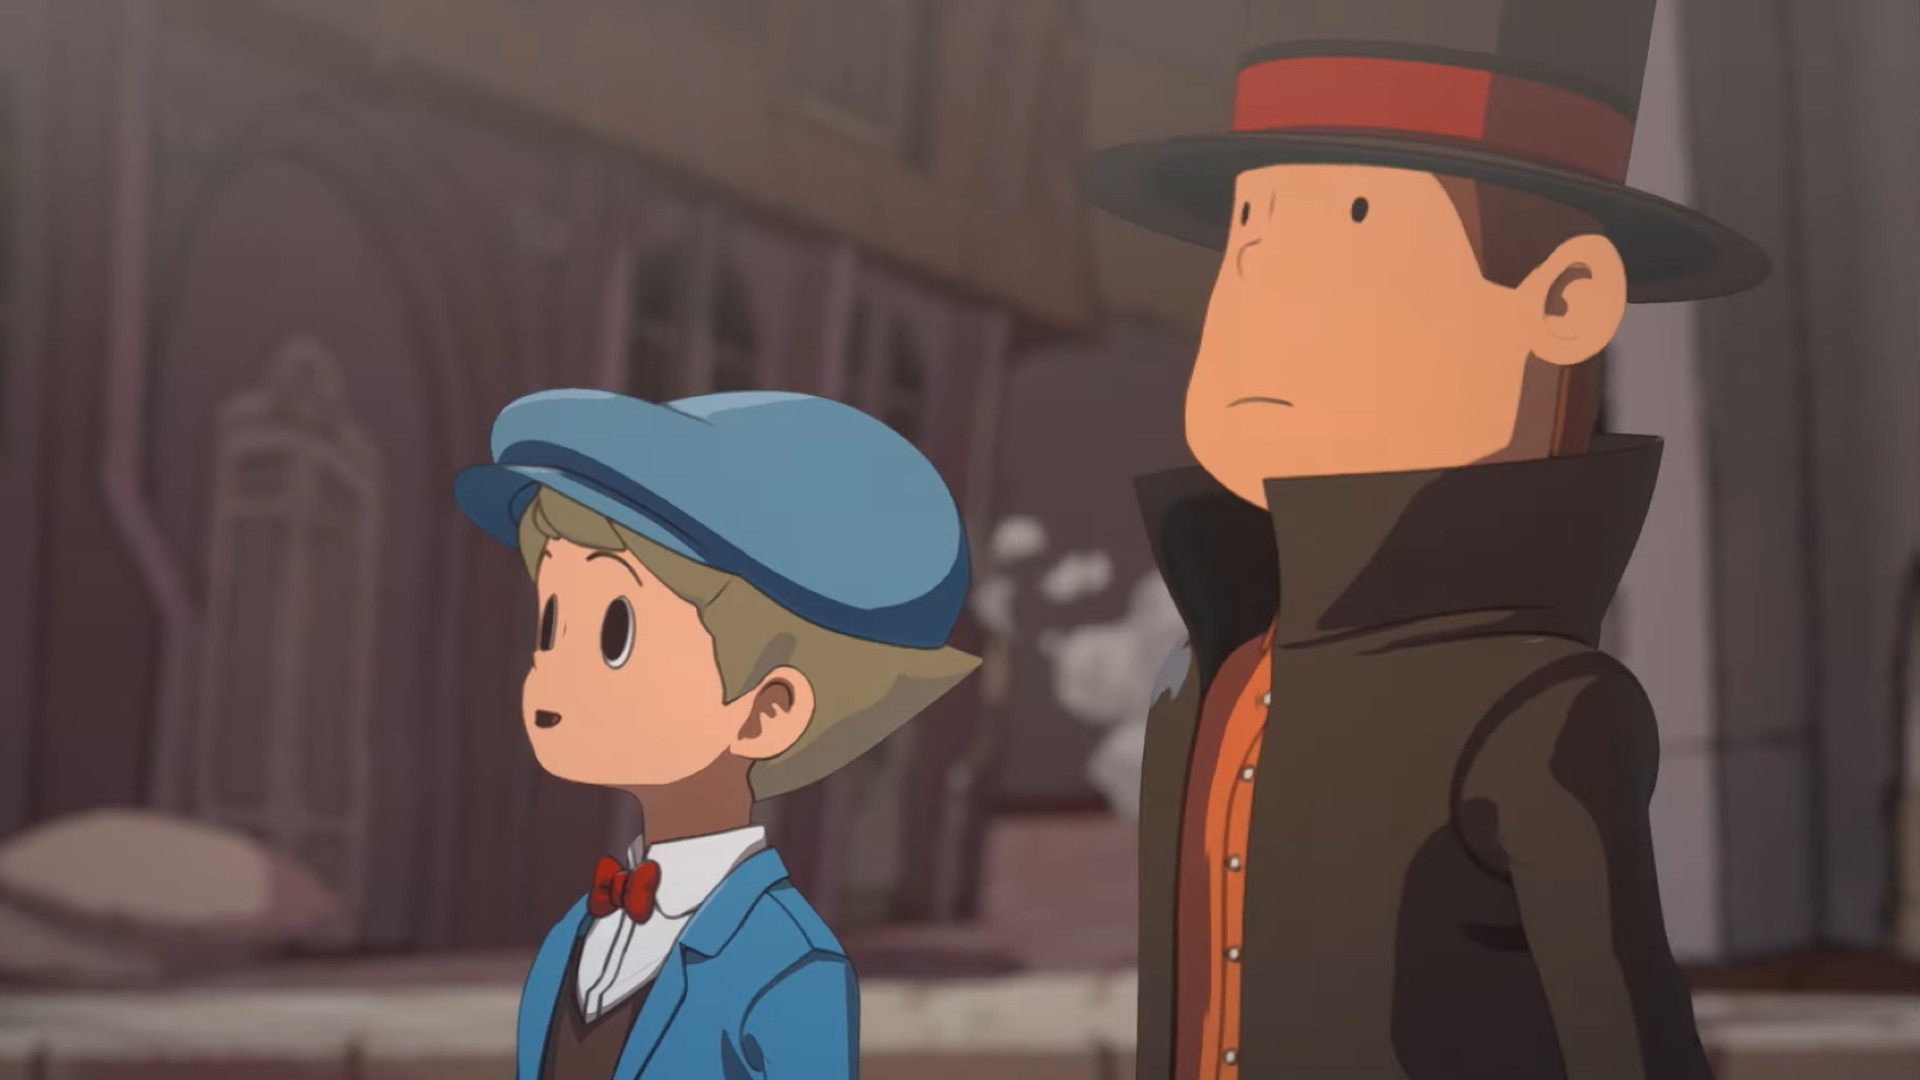 Professor Layton and the New World of Steam - Teaser Trailer